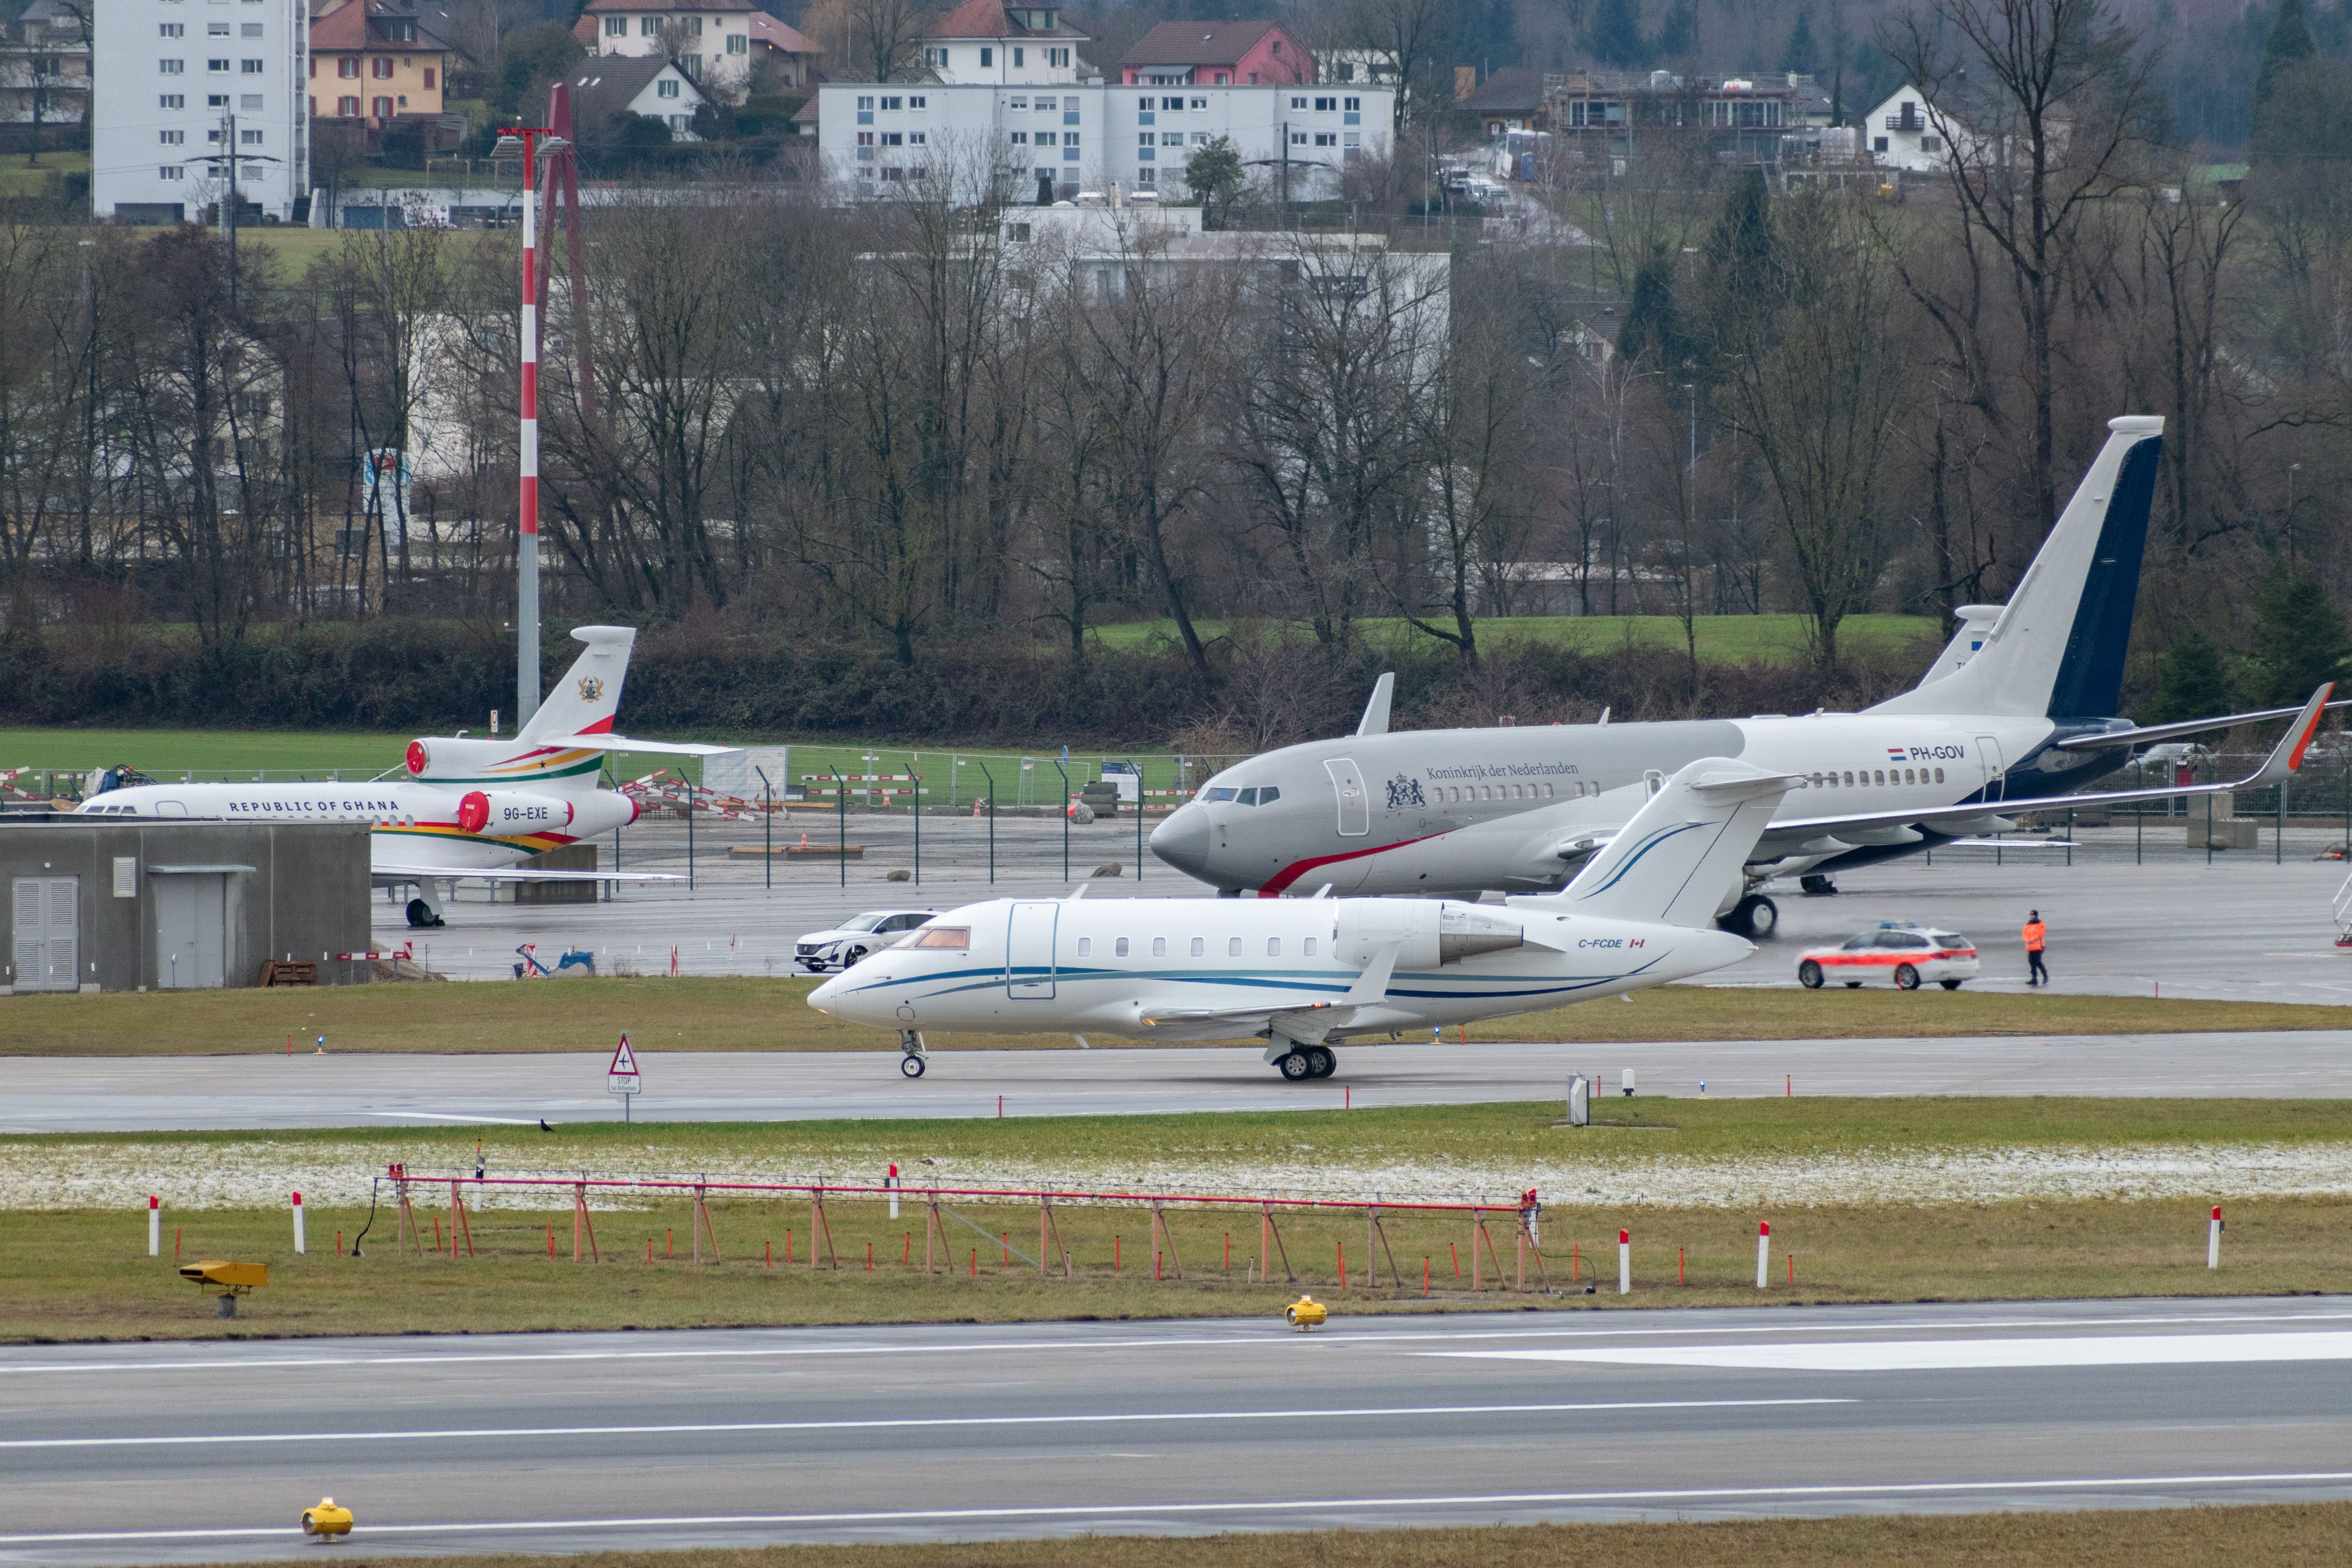 Several business jets on an airport apron.